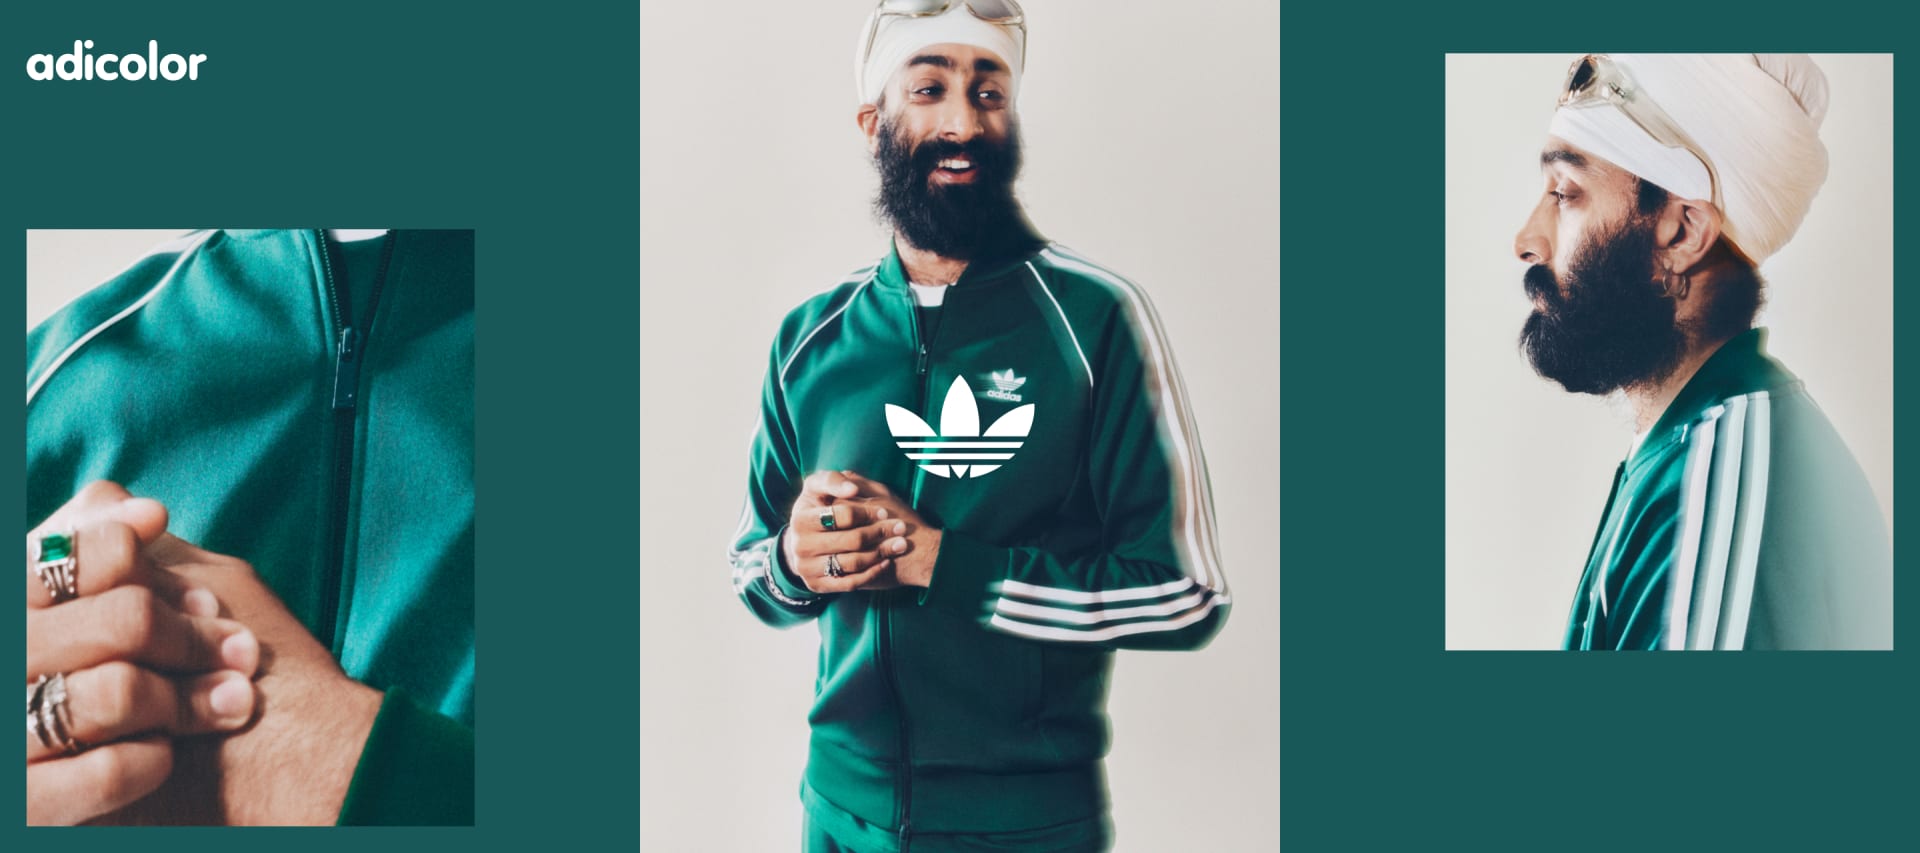 A collage of a man with black beard smiling and looking off camera while wearing a green adicolor tracksuit and a white turban.